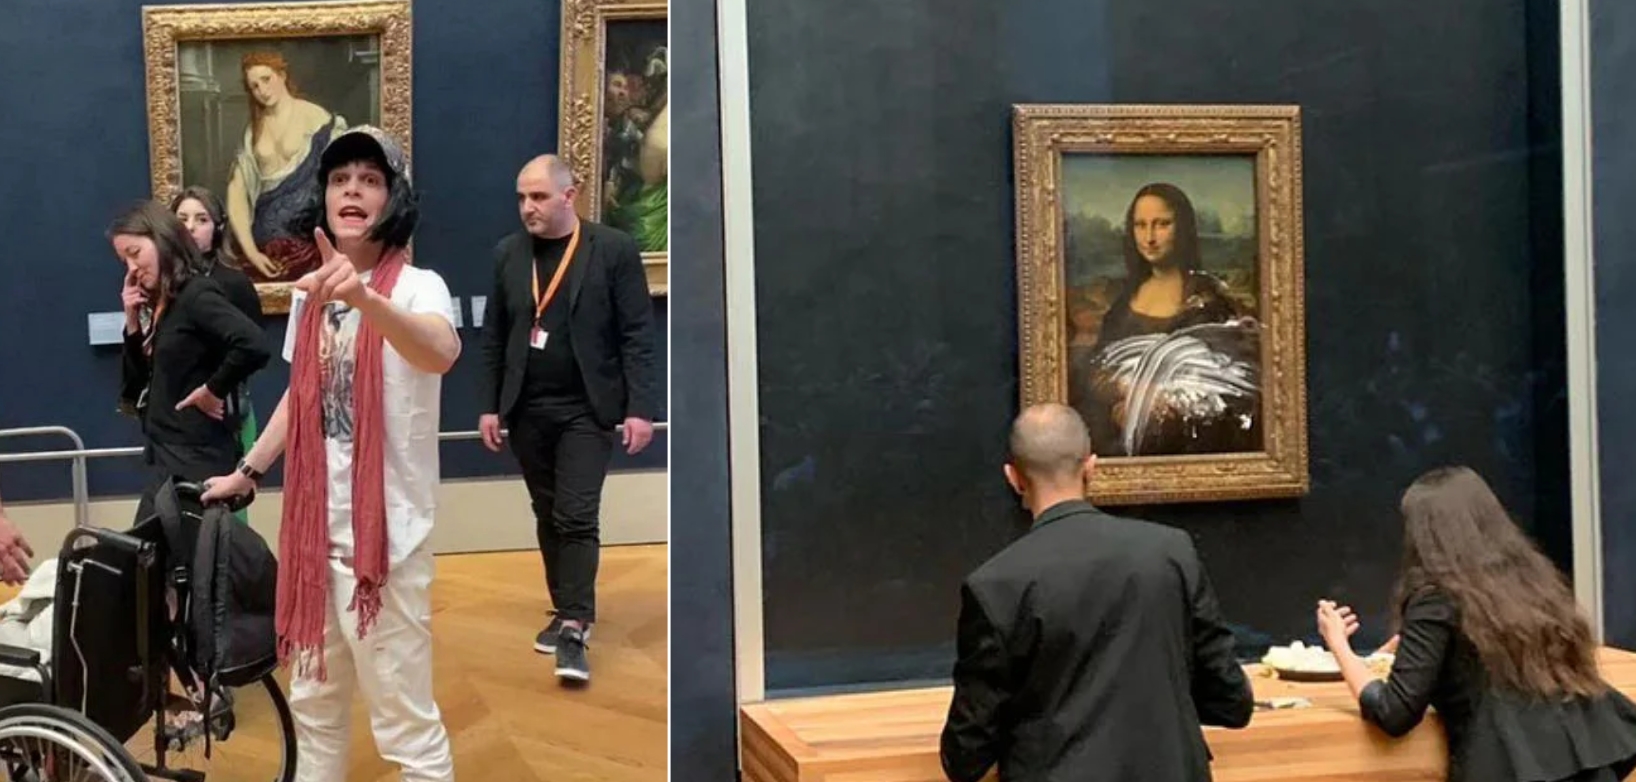 Why have people attacked the Mona Lisa?